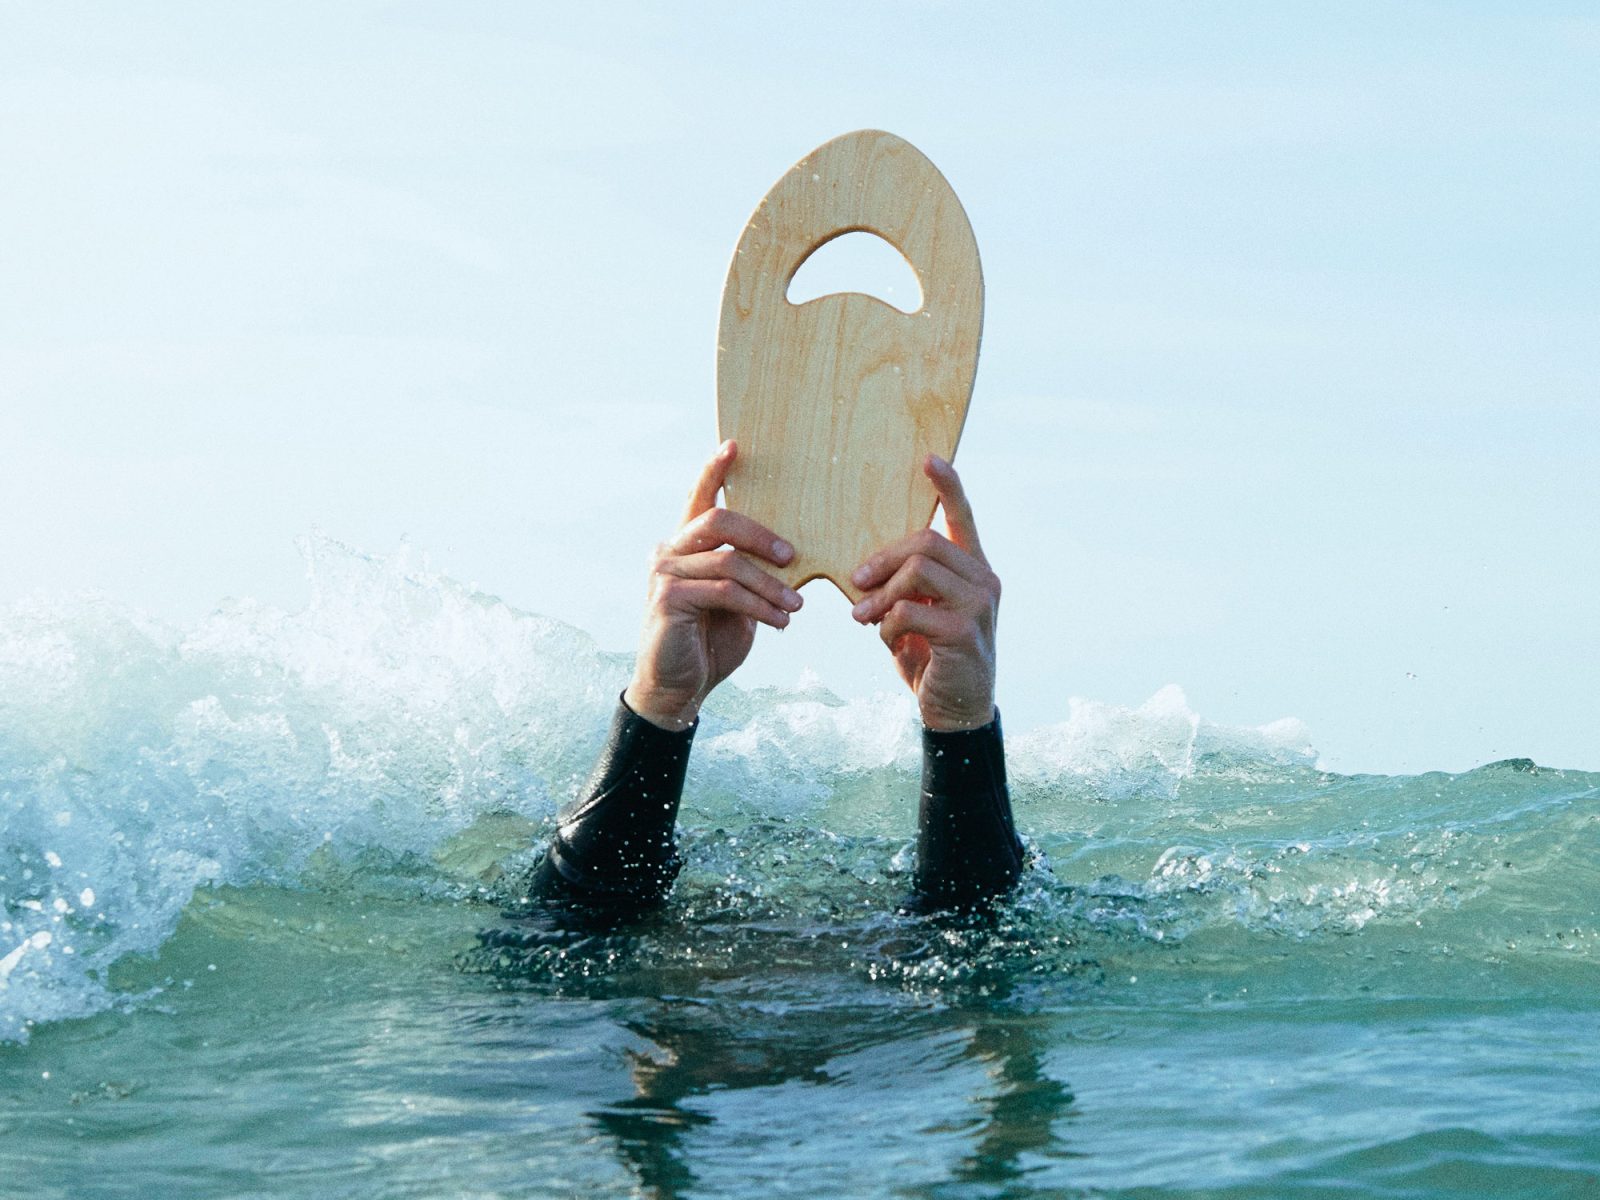 Arms covered by wet suit hold small blond wooden board above water, from IKEA KÅSEBERGA surf collection.